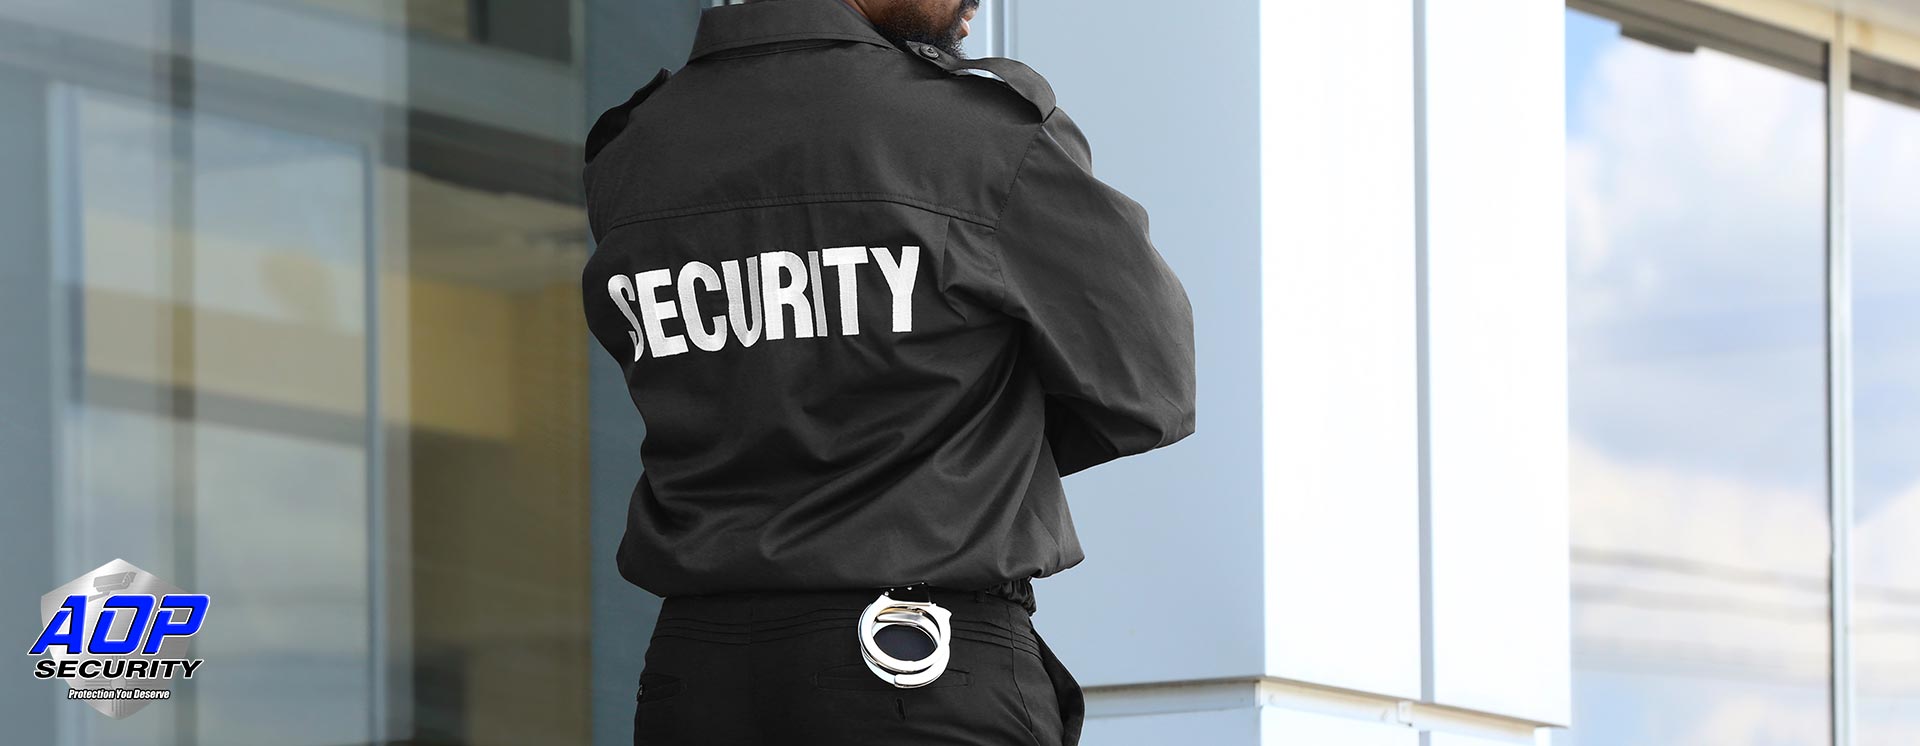 24-hour security officer